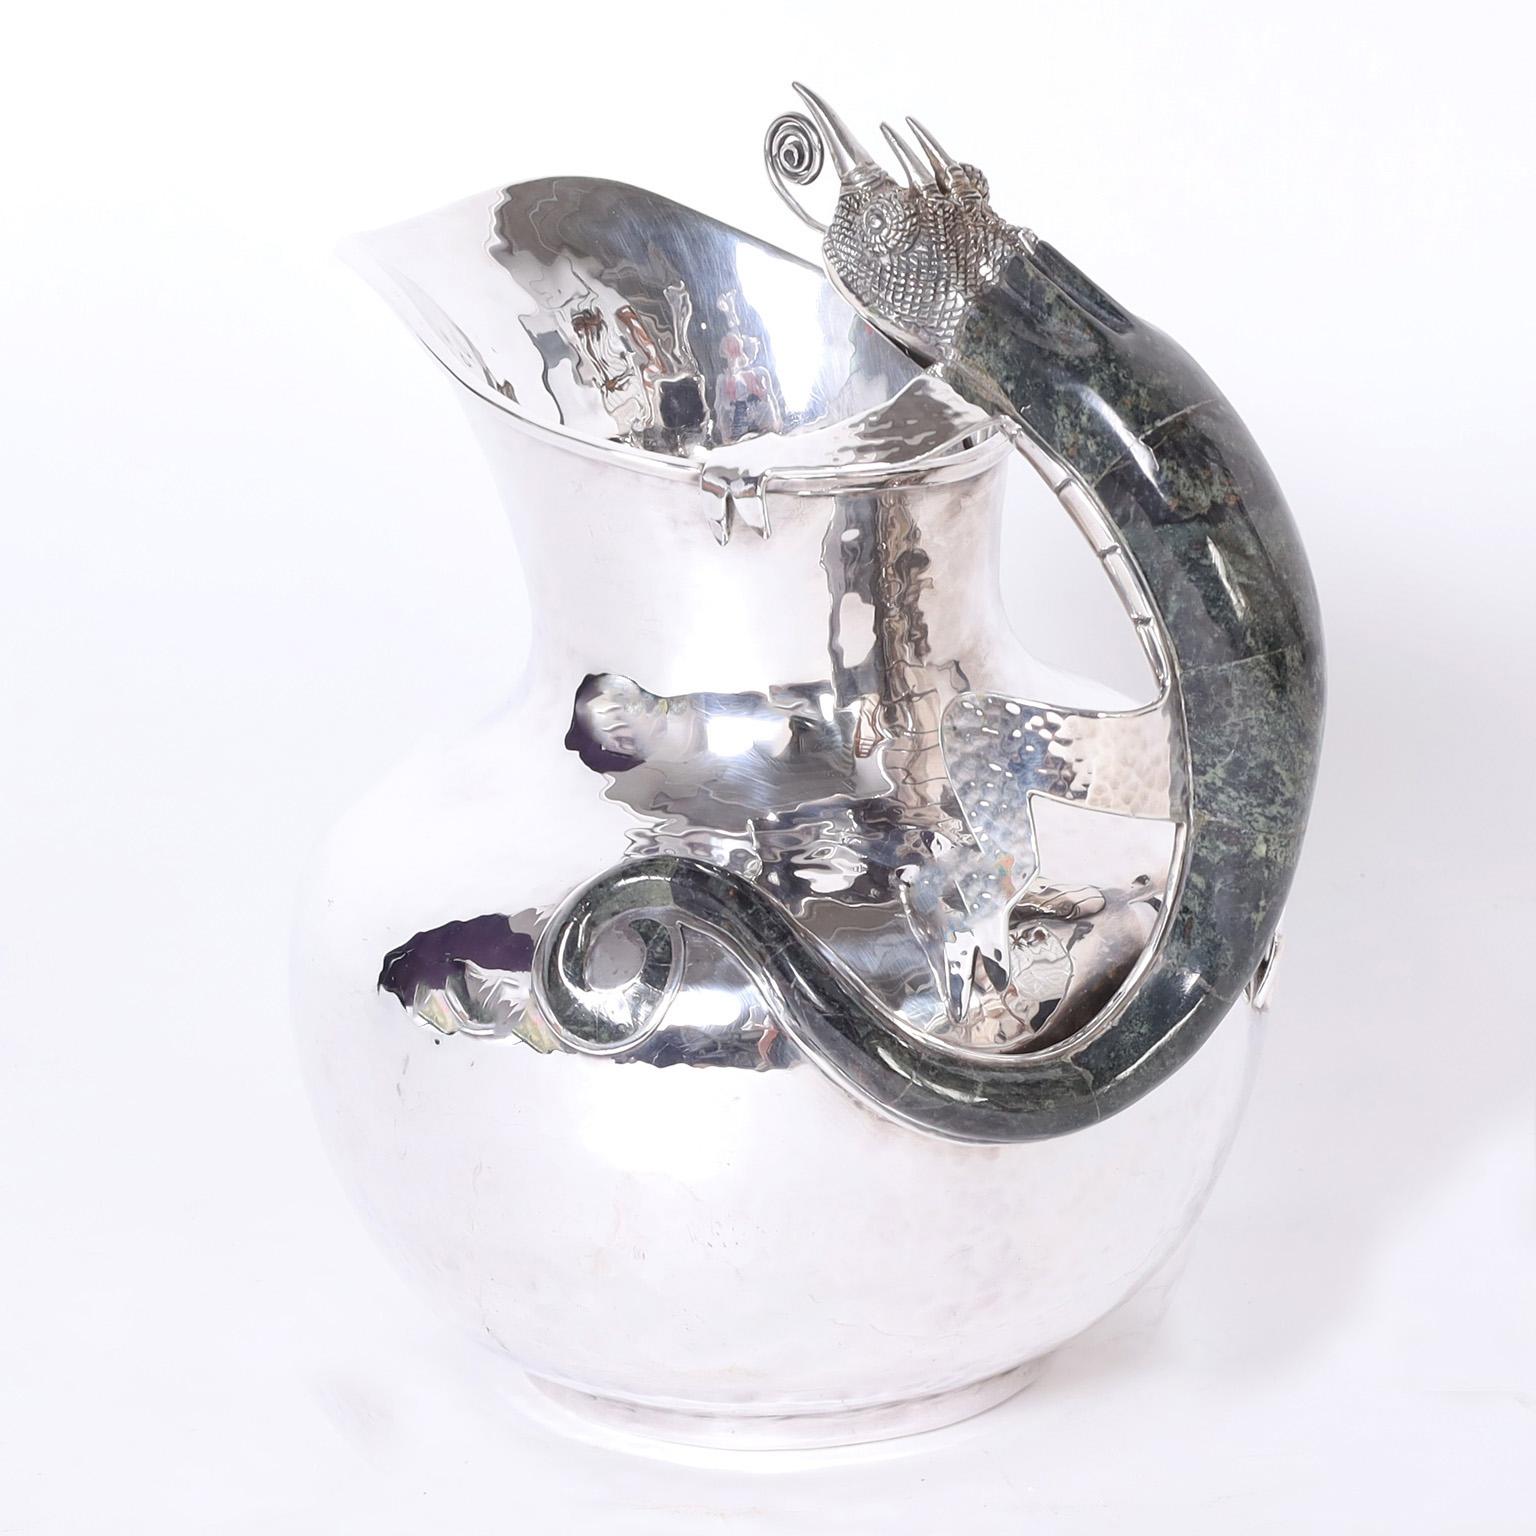 Mid-century water pitcher hand crafted by master silversmiths in silver plate over hammered copper featuring a chameleon clad in stone as a handle. Stamped Los Castillo on the bottom.